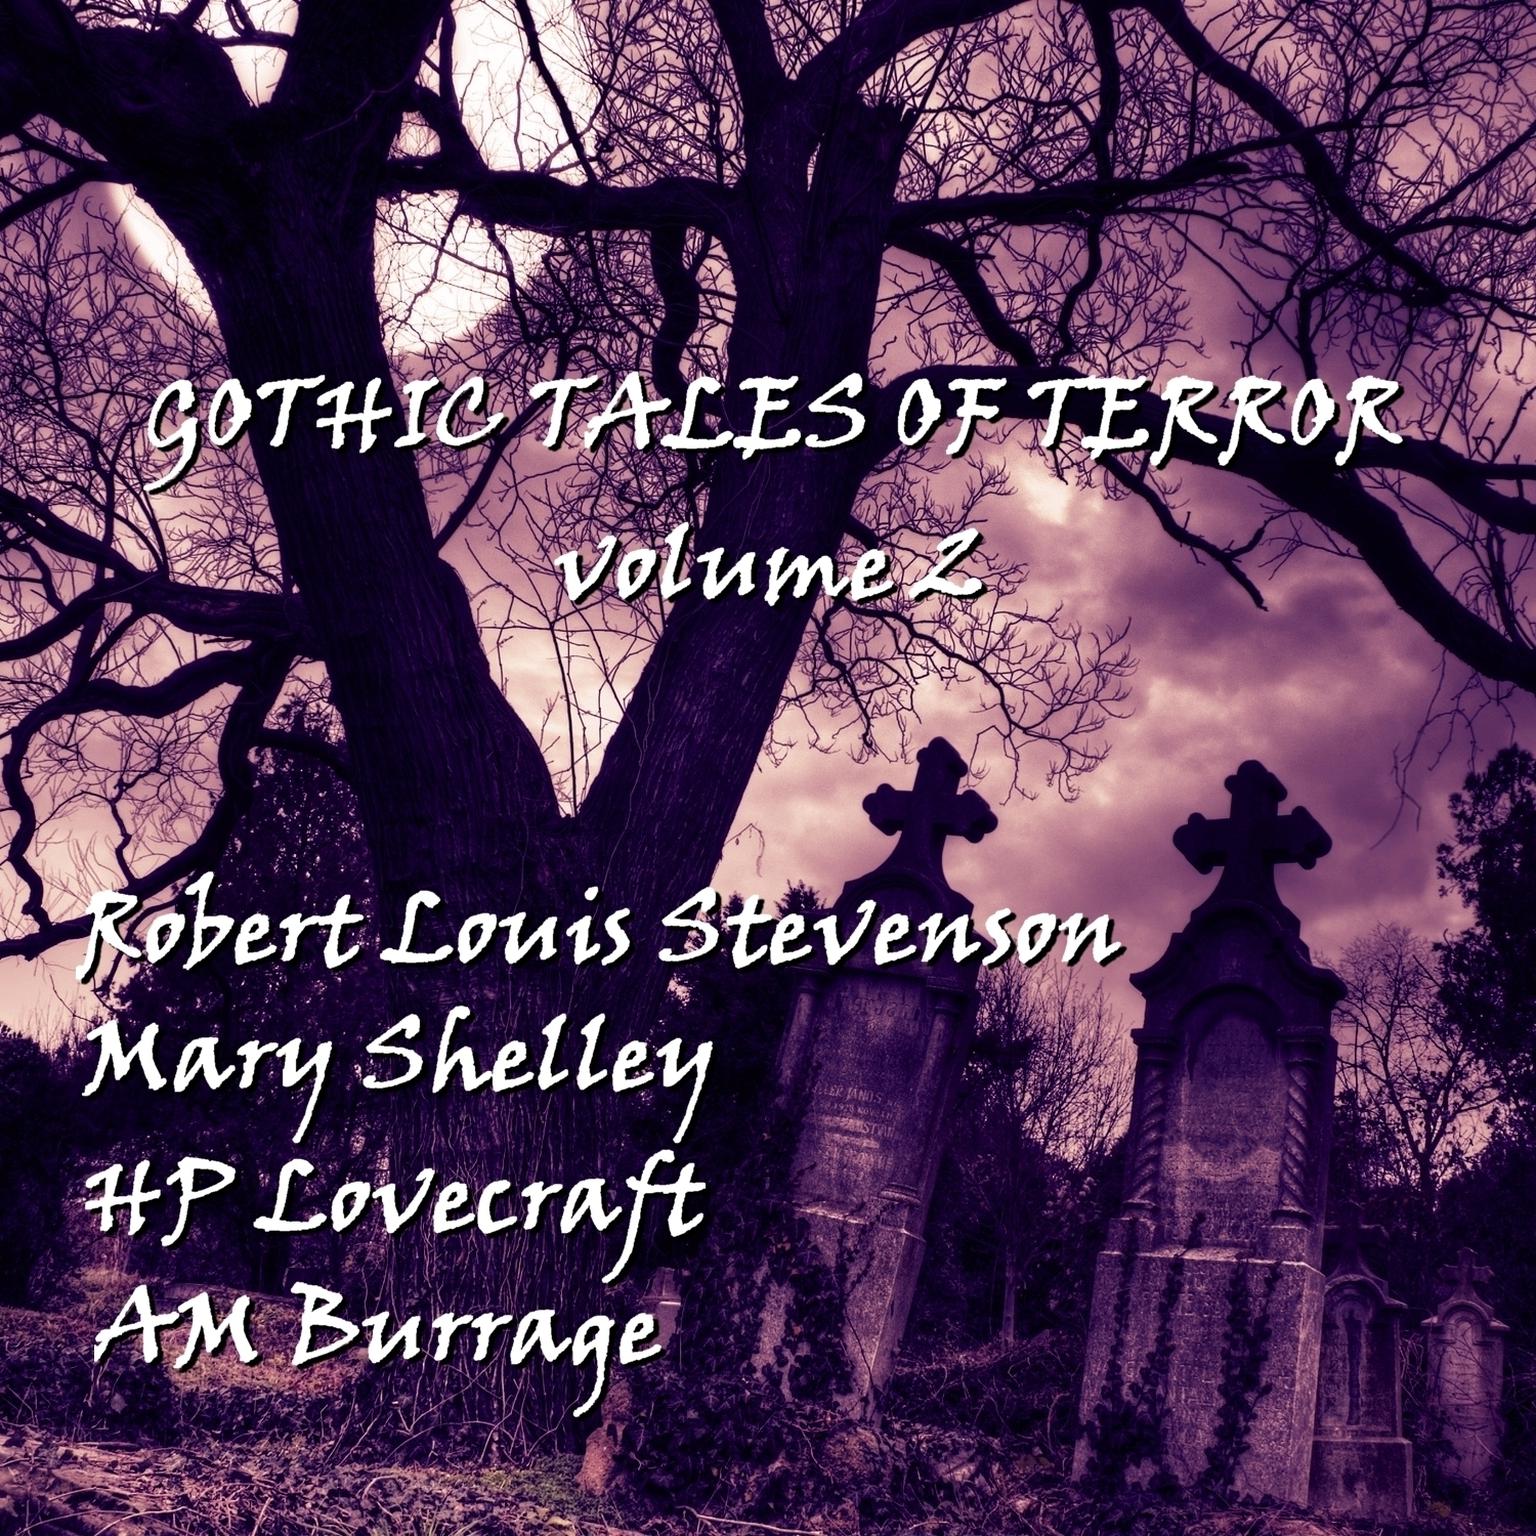 Gothic Tales of Terror, Vol. 2 (Abridged) Audiobook, by various authors